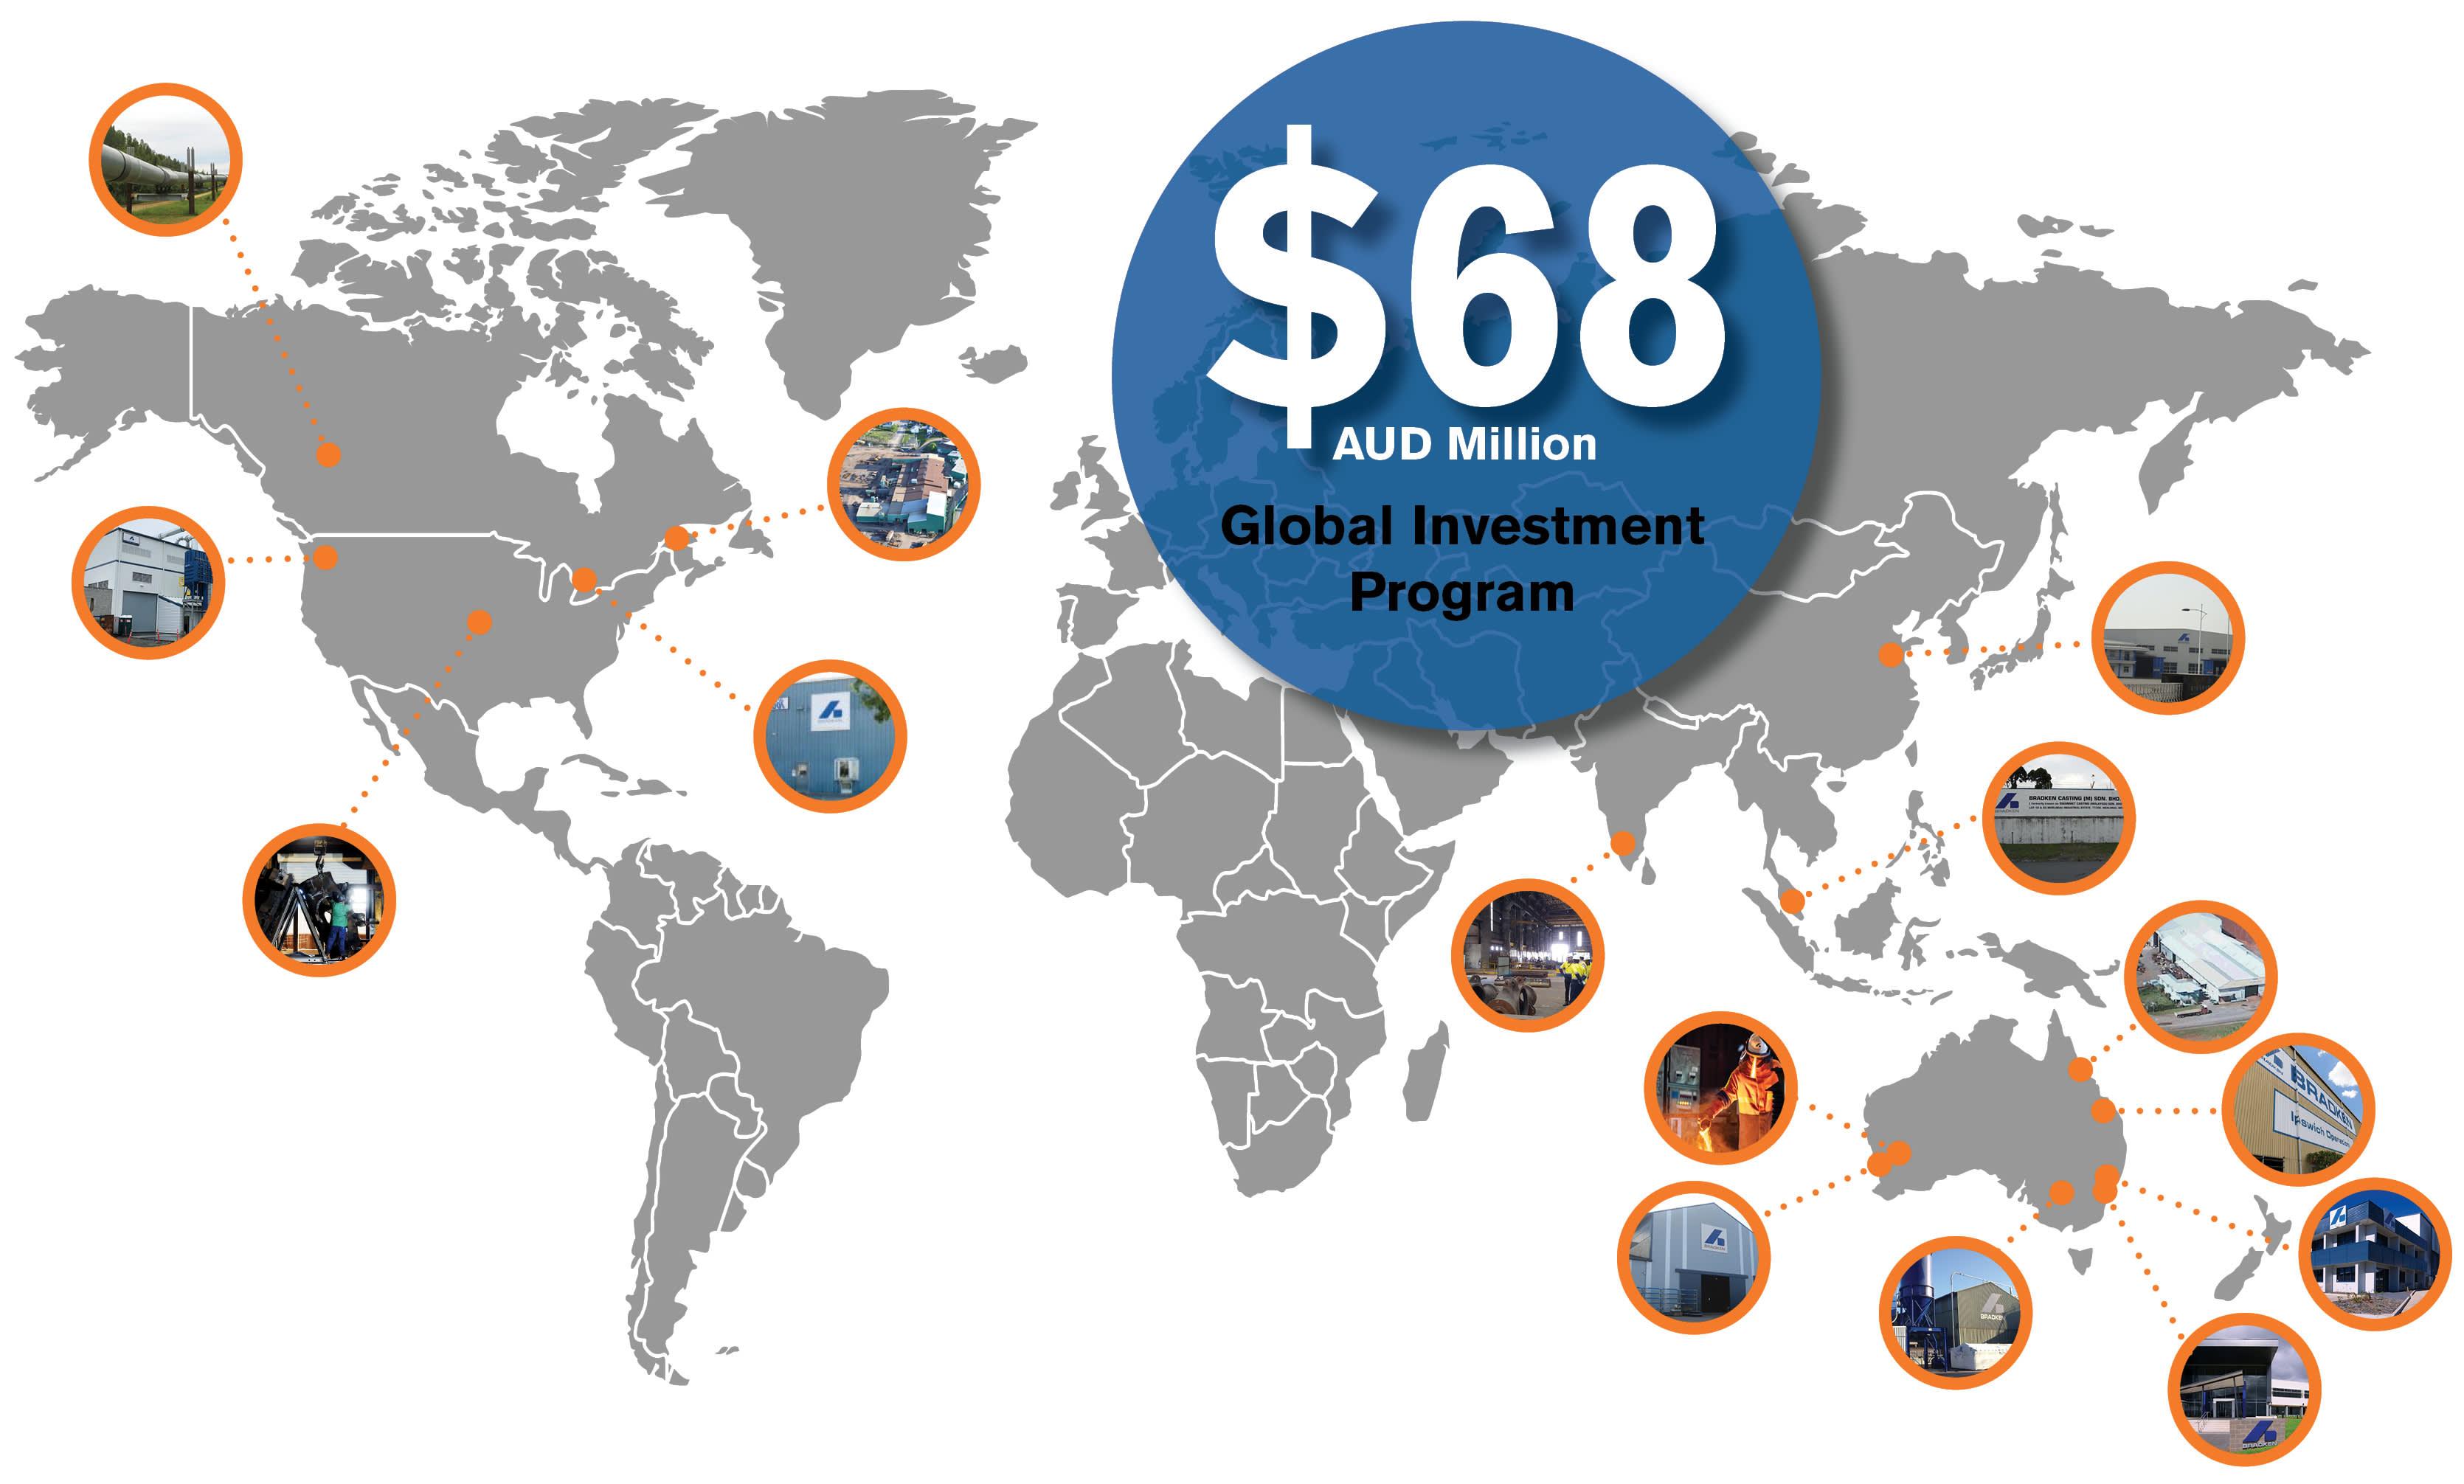 grey coloured world map separated by country with pinpointed locations highlighted with pictures representing Bradken locations in a small orange circle. A large blue circle sits in the centre and reads $68 AUD million global investment program.